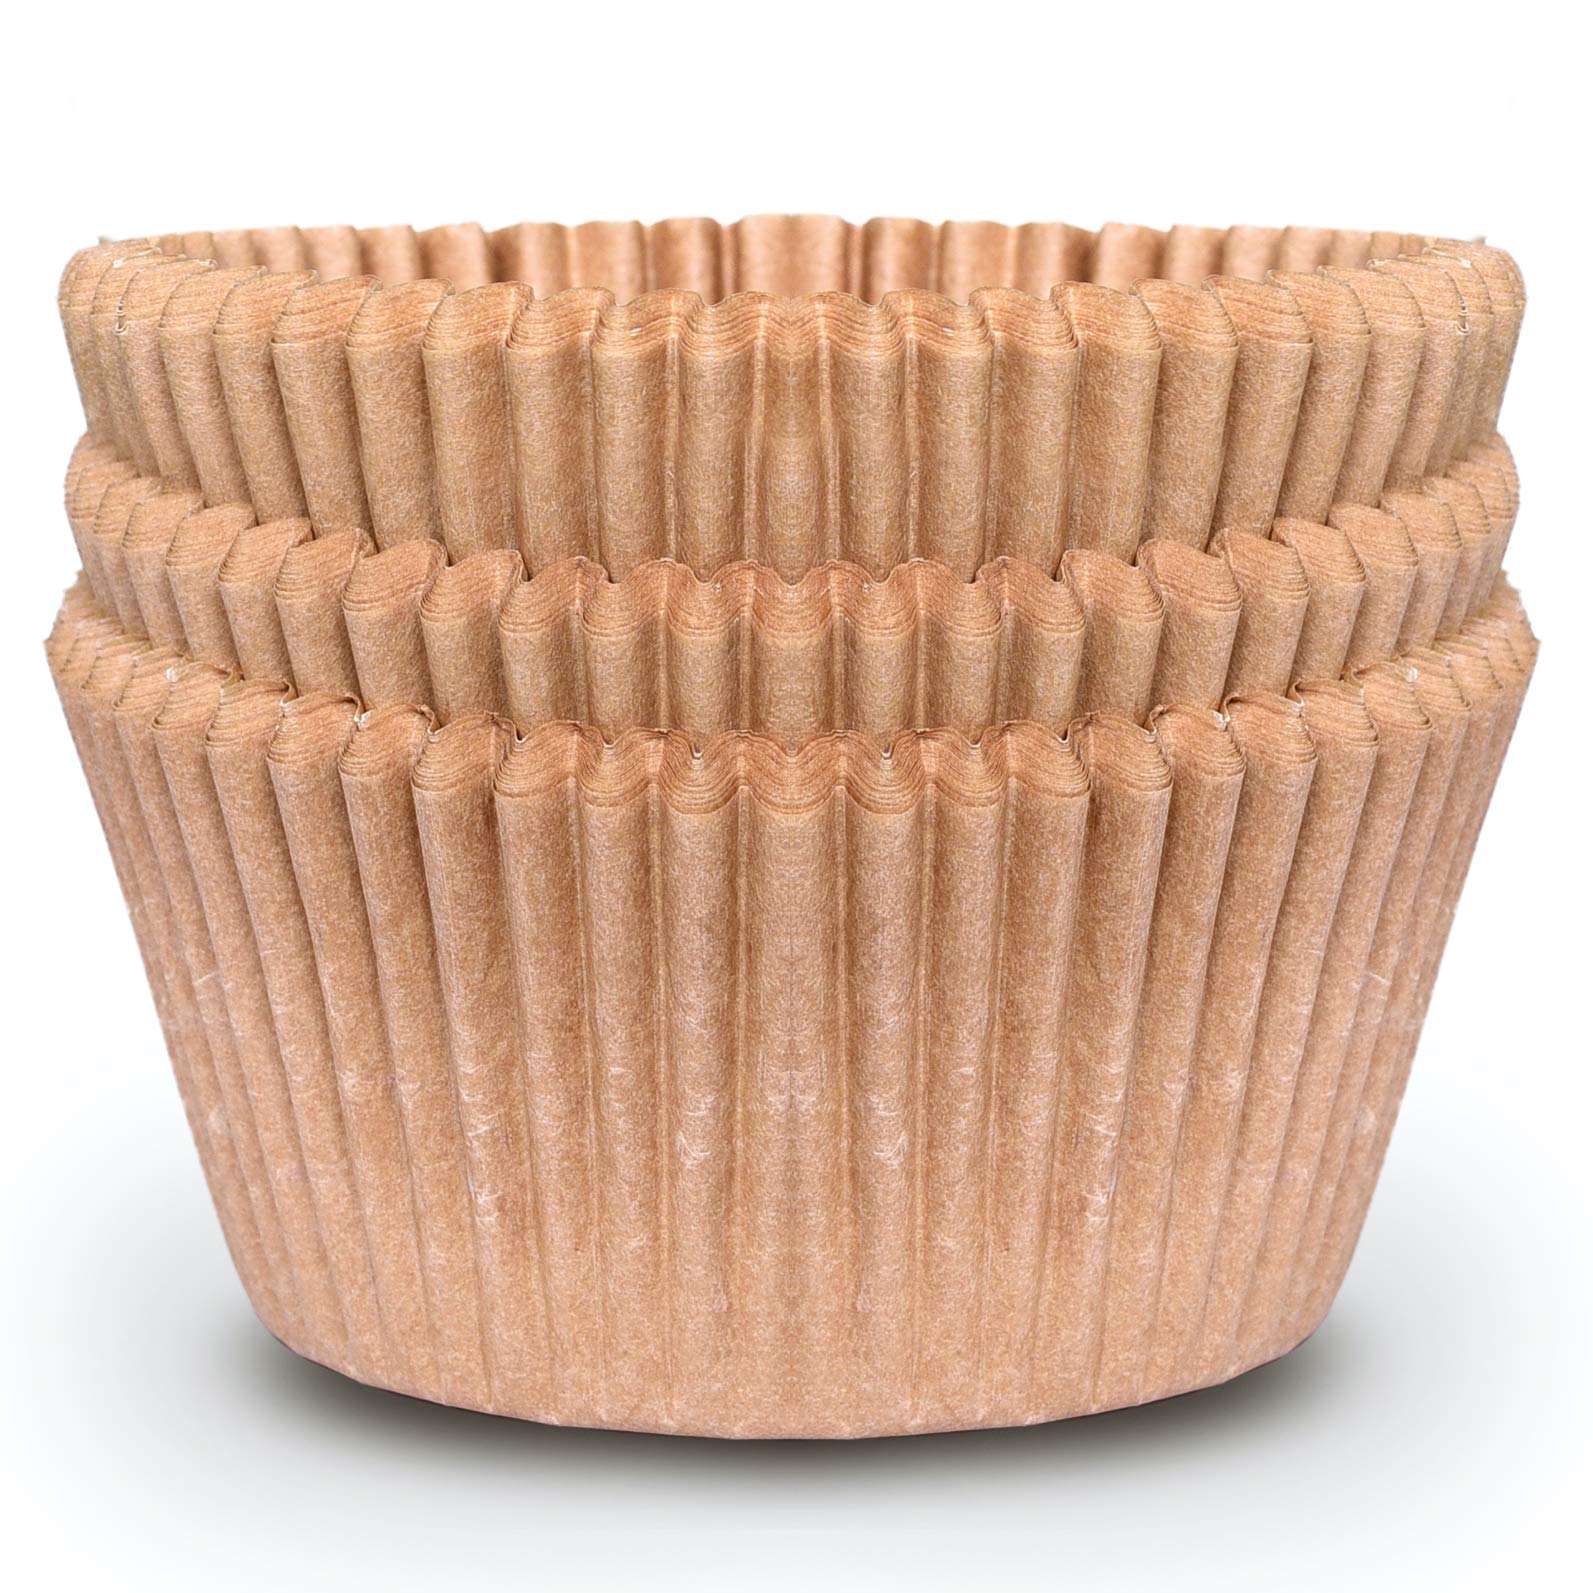 Jumbo Cupcake Baking Cup Liner - Extra Thick Unbleached Parchment